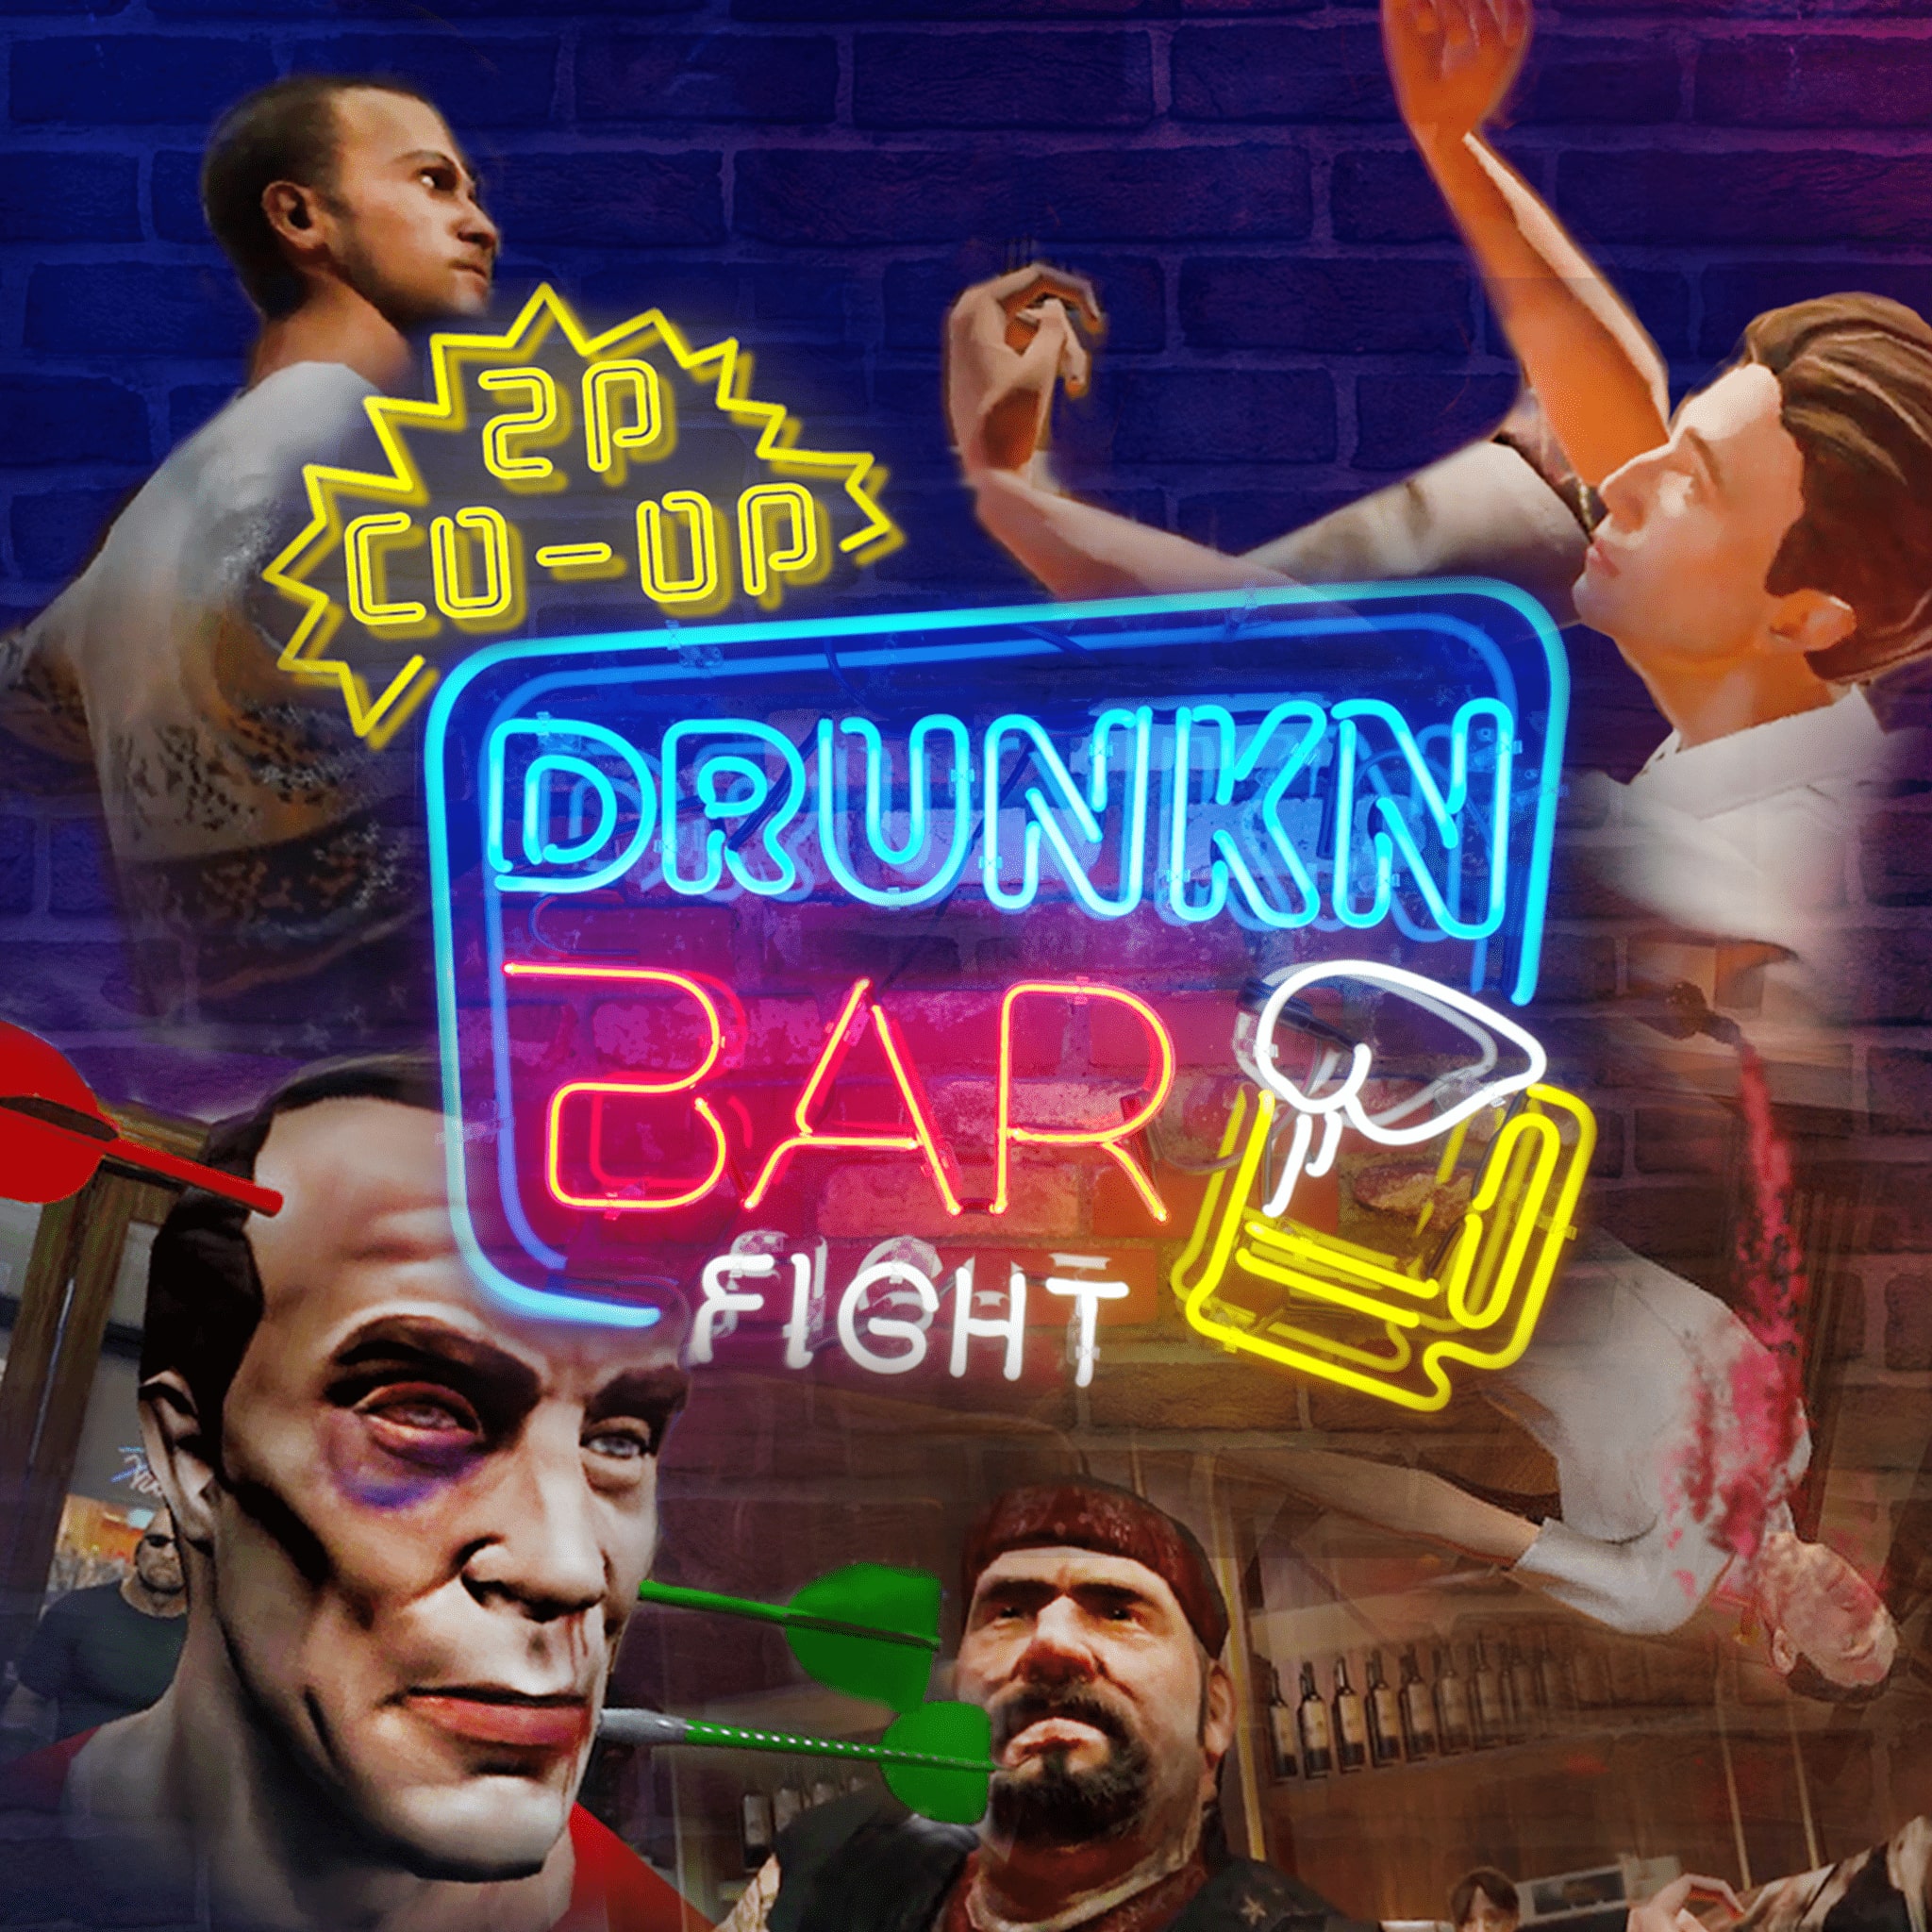 vr bar fight game